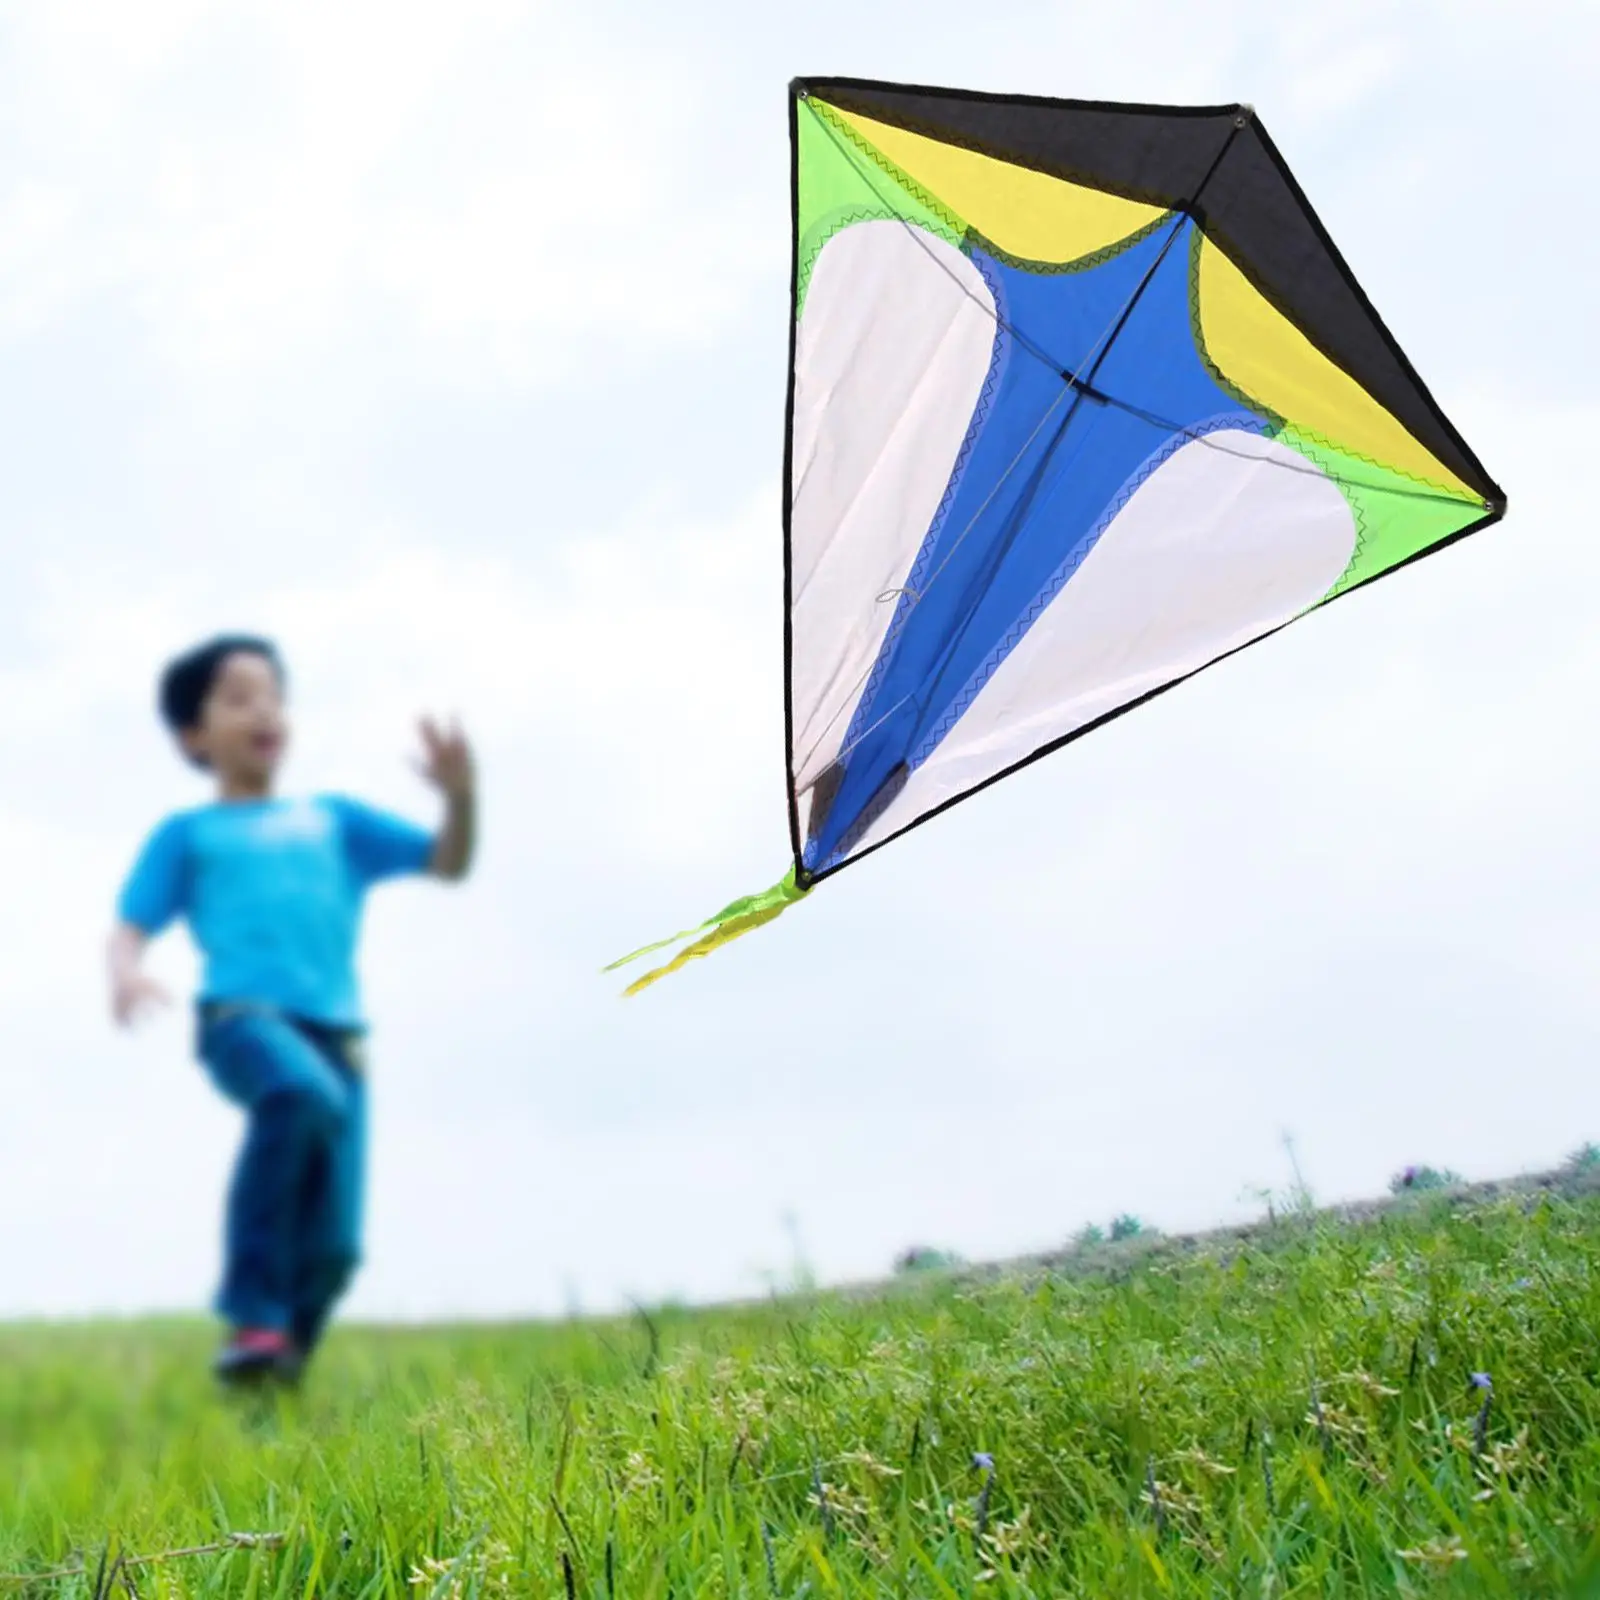 Colorful Rhombus Kite, Fly  with String Easy to  to Assemble Lightweight Toys for Teenagers Kids  Childhood Memories